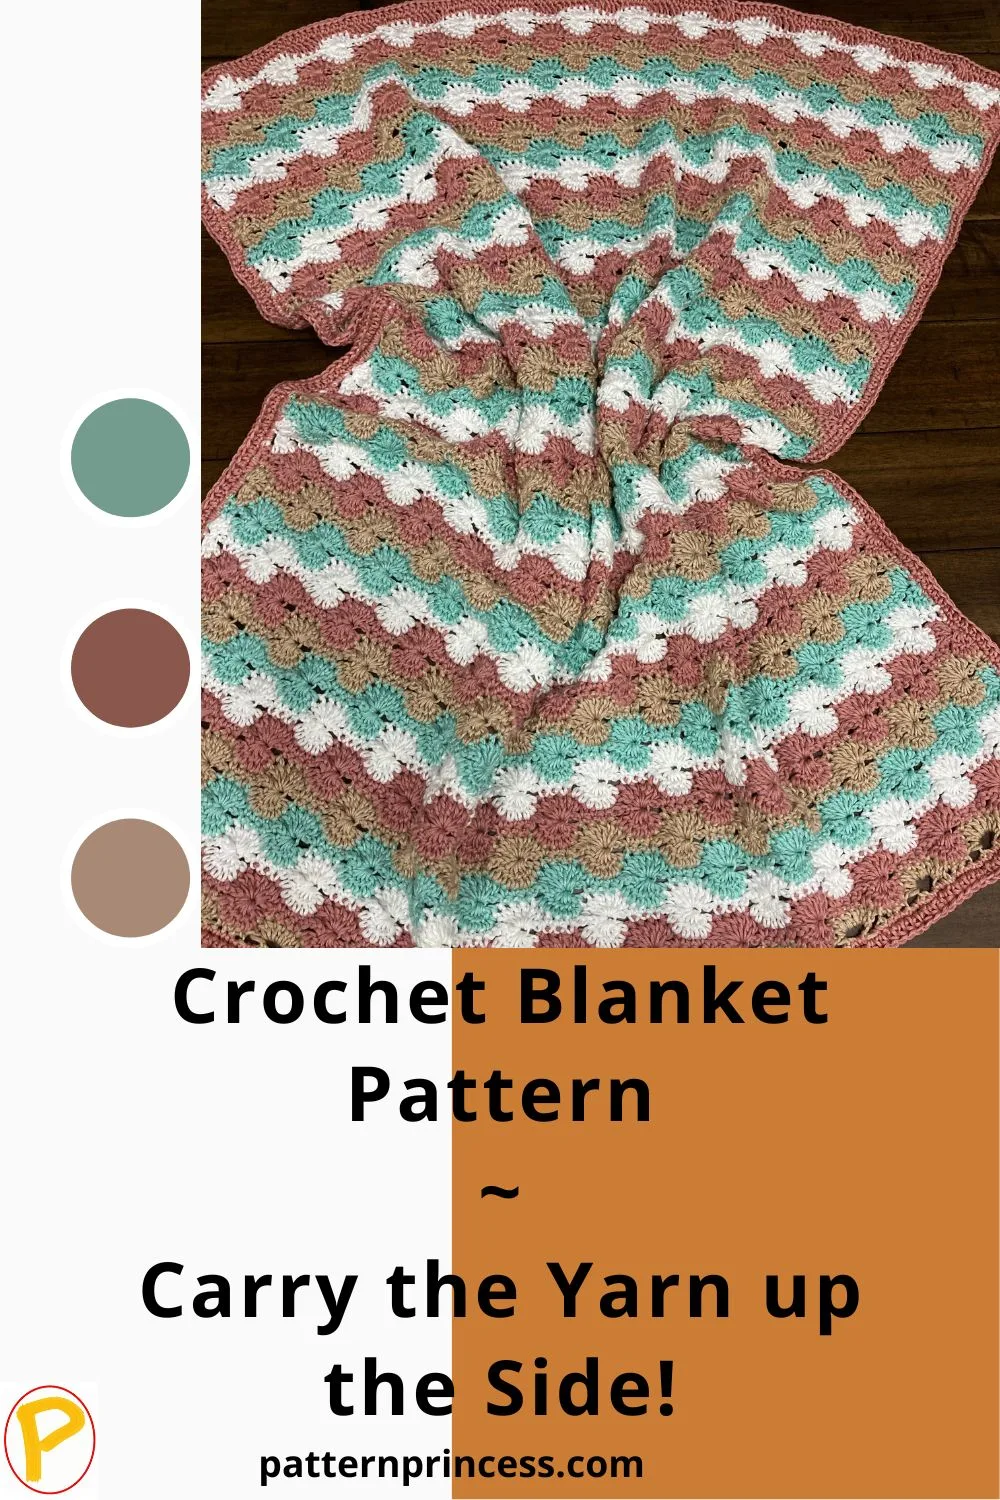 Crochet Blanket Pattern _ Carry the Yarn up the Side!